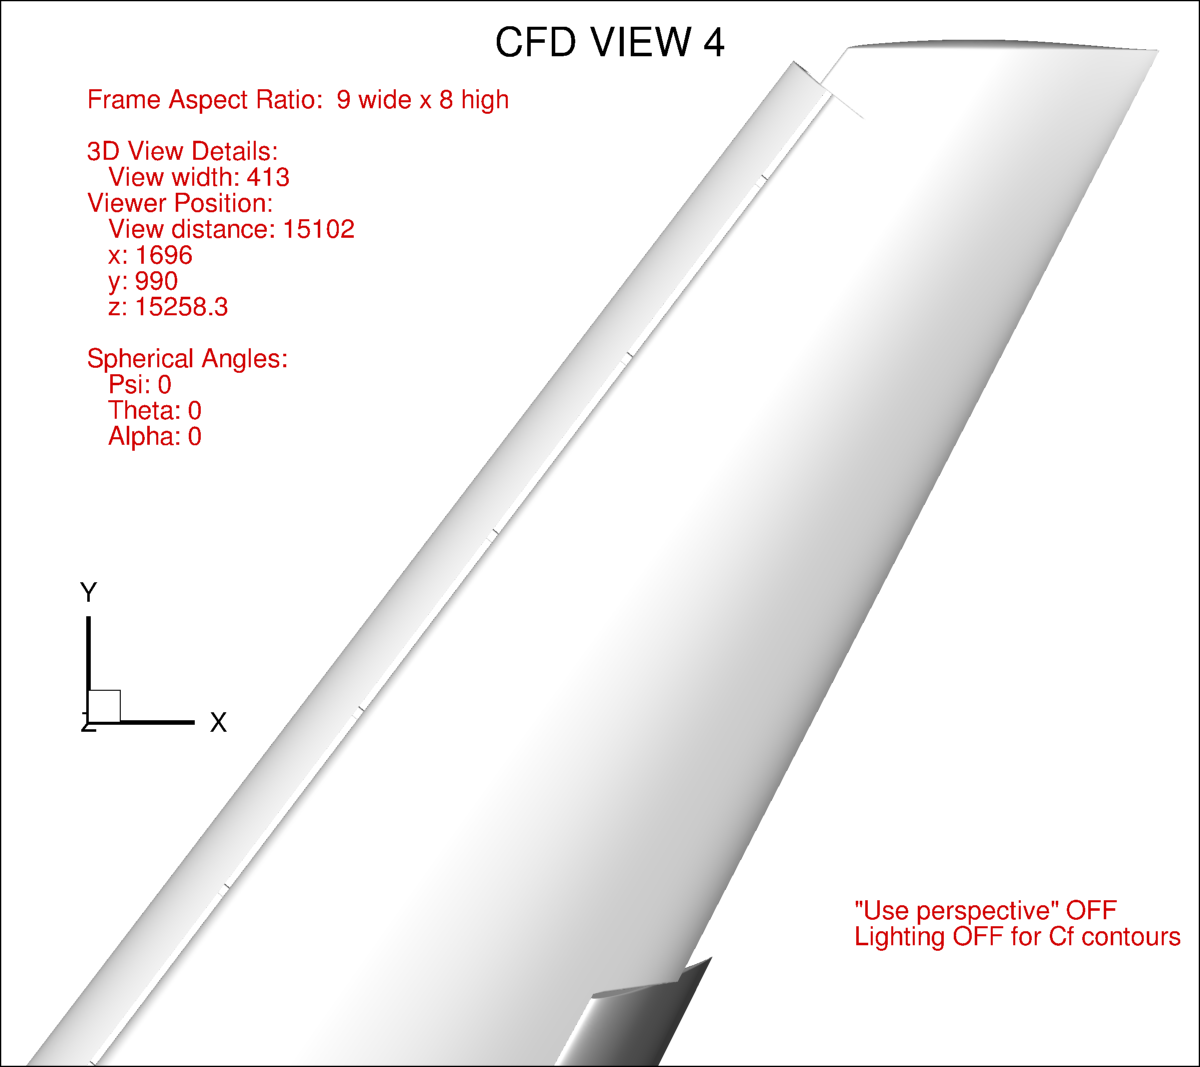 Example CFD view #4